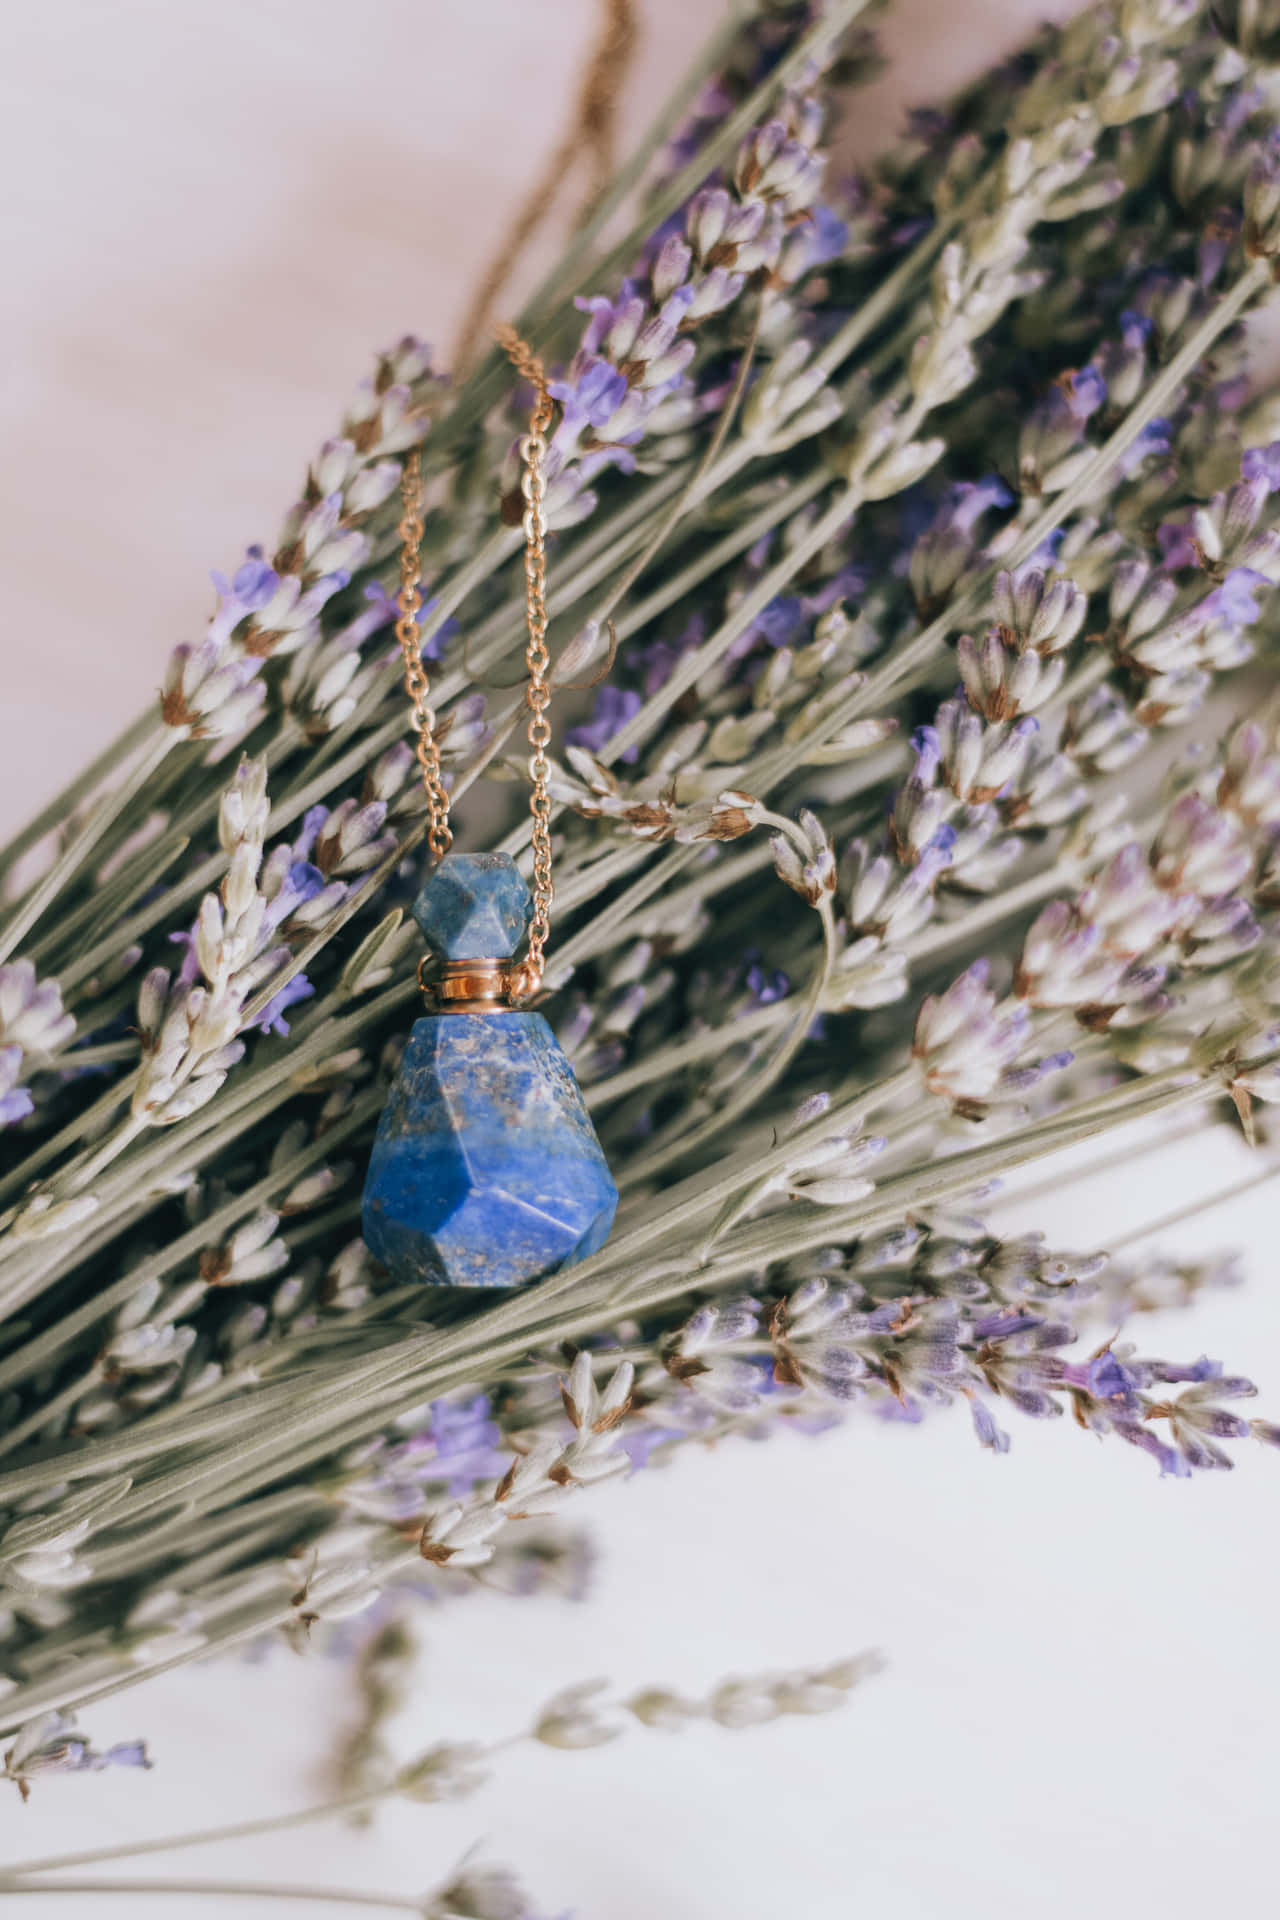 A Blue Stone Pendant With Lavender Flowers